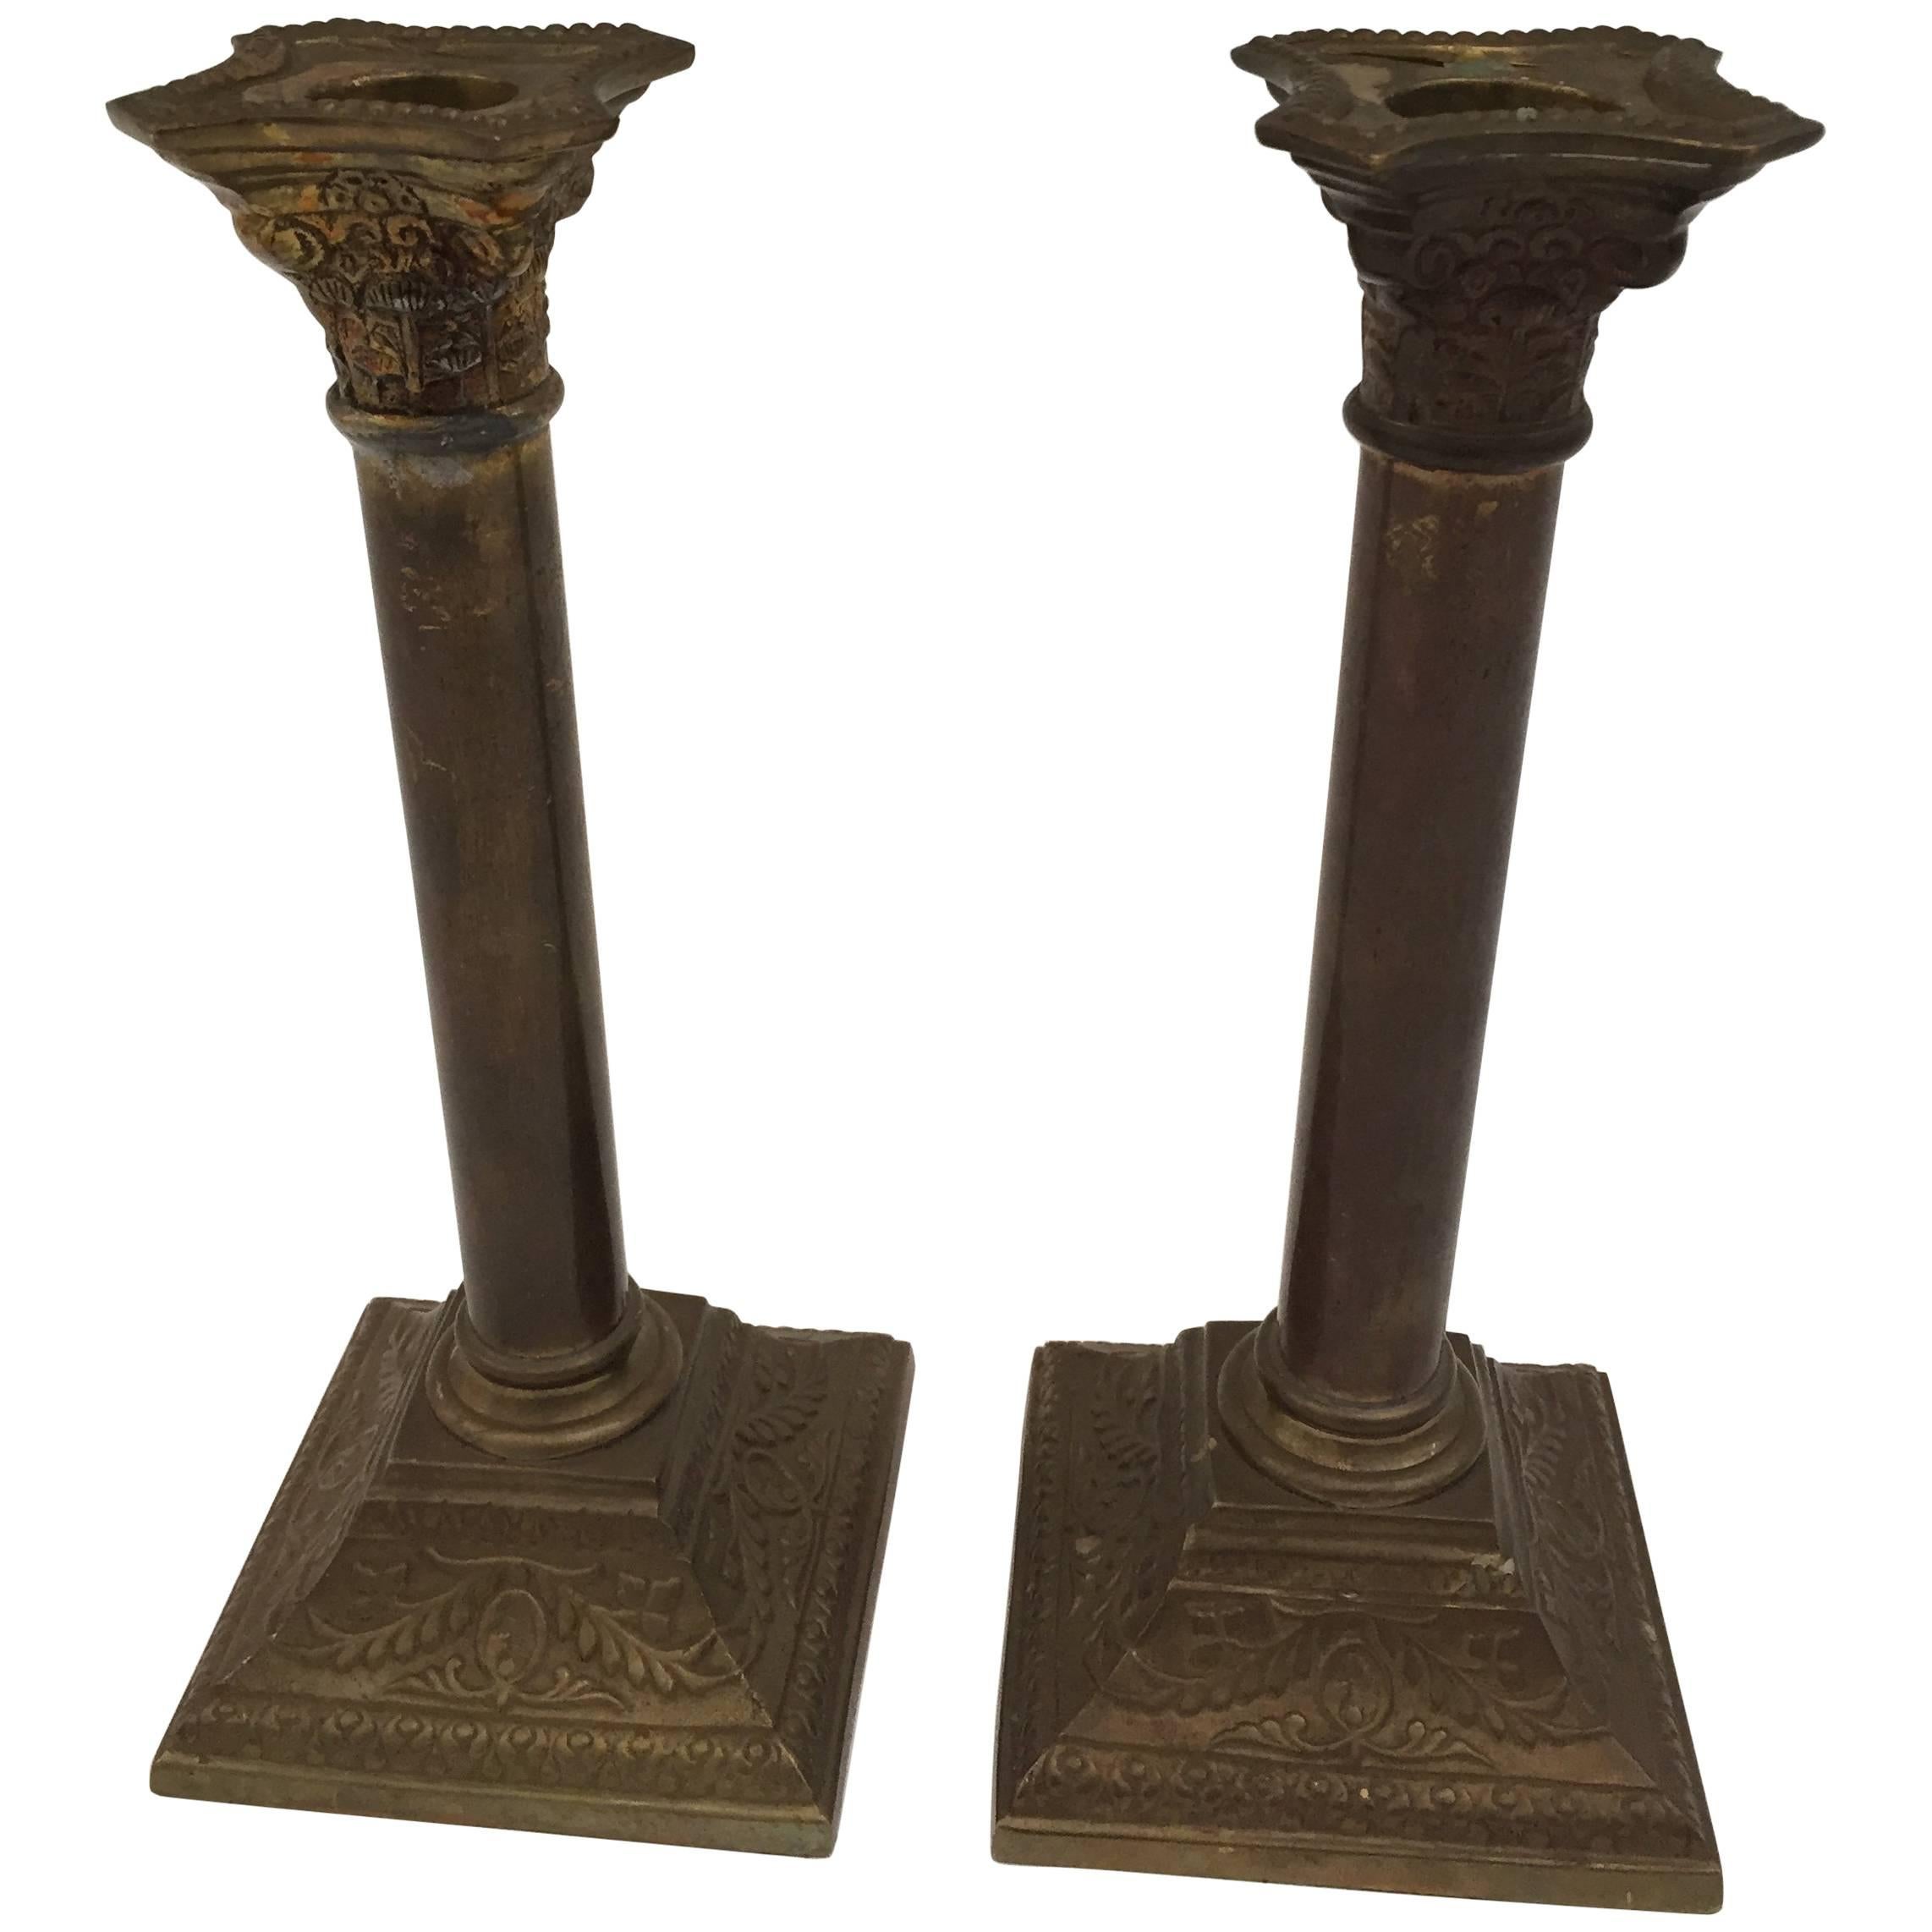 A very nice pair of George III neoclassical style brass candlesticks with square bases and columnar shafts supporting urn form candle cups.
The candlestick are in form of columns, the bases and top are square with neoclassical ornate designs.
Nice